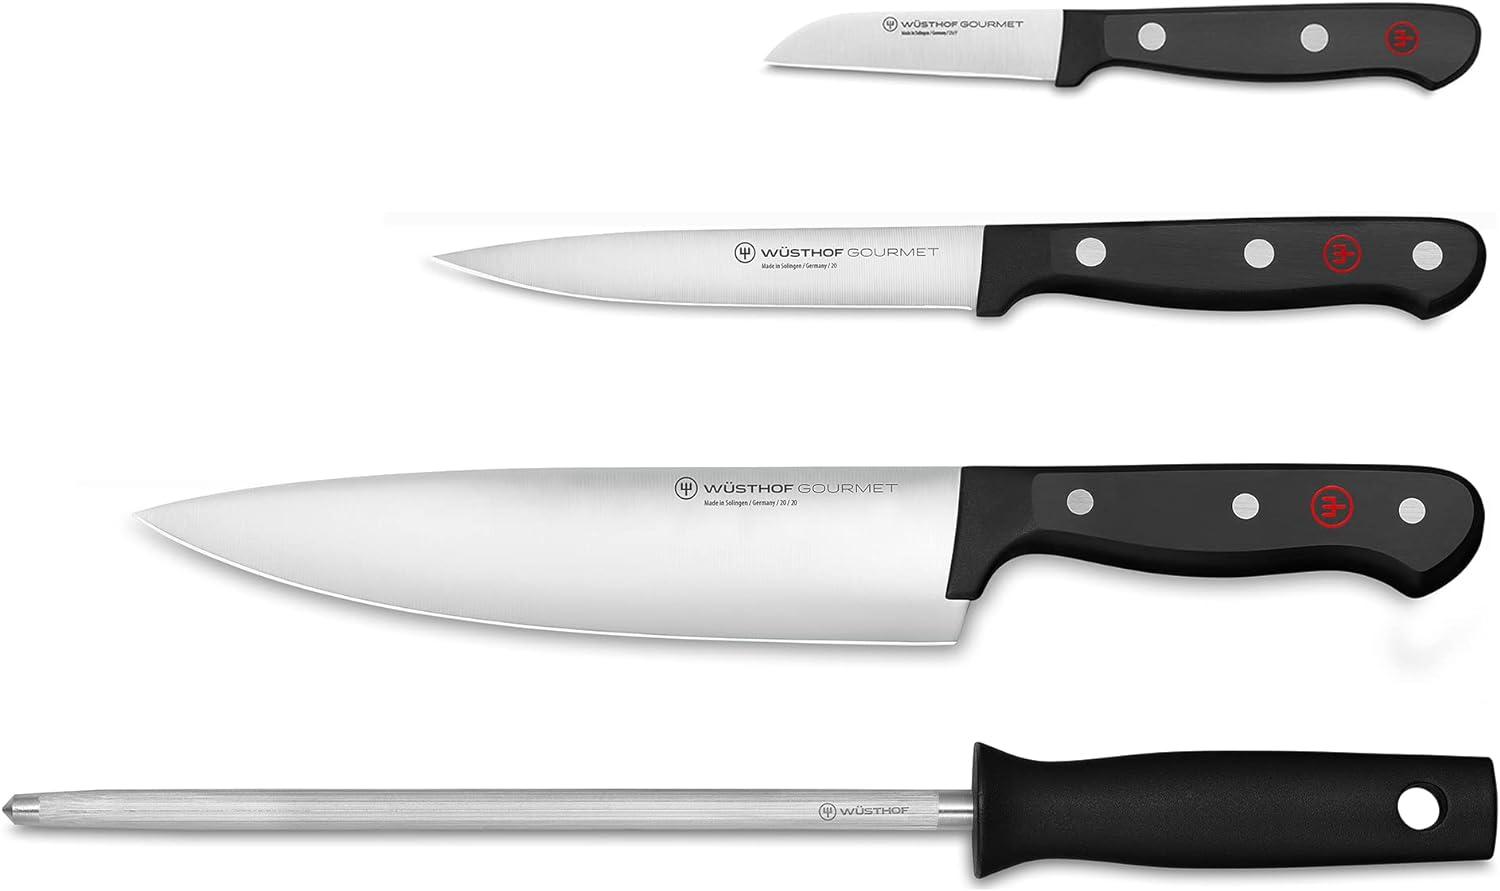 Wusthof Gourmet 4-Piece Chefs Knife Set for $99.99 Shipped